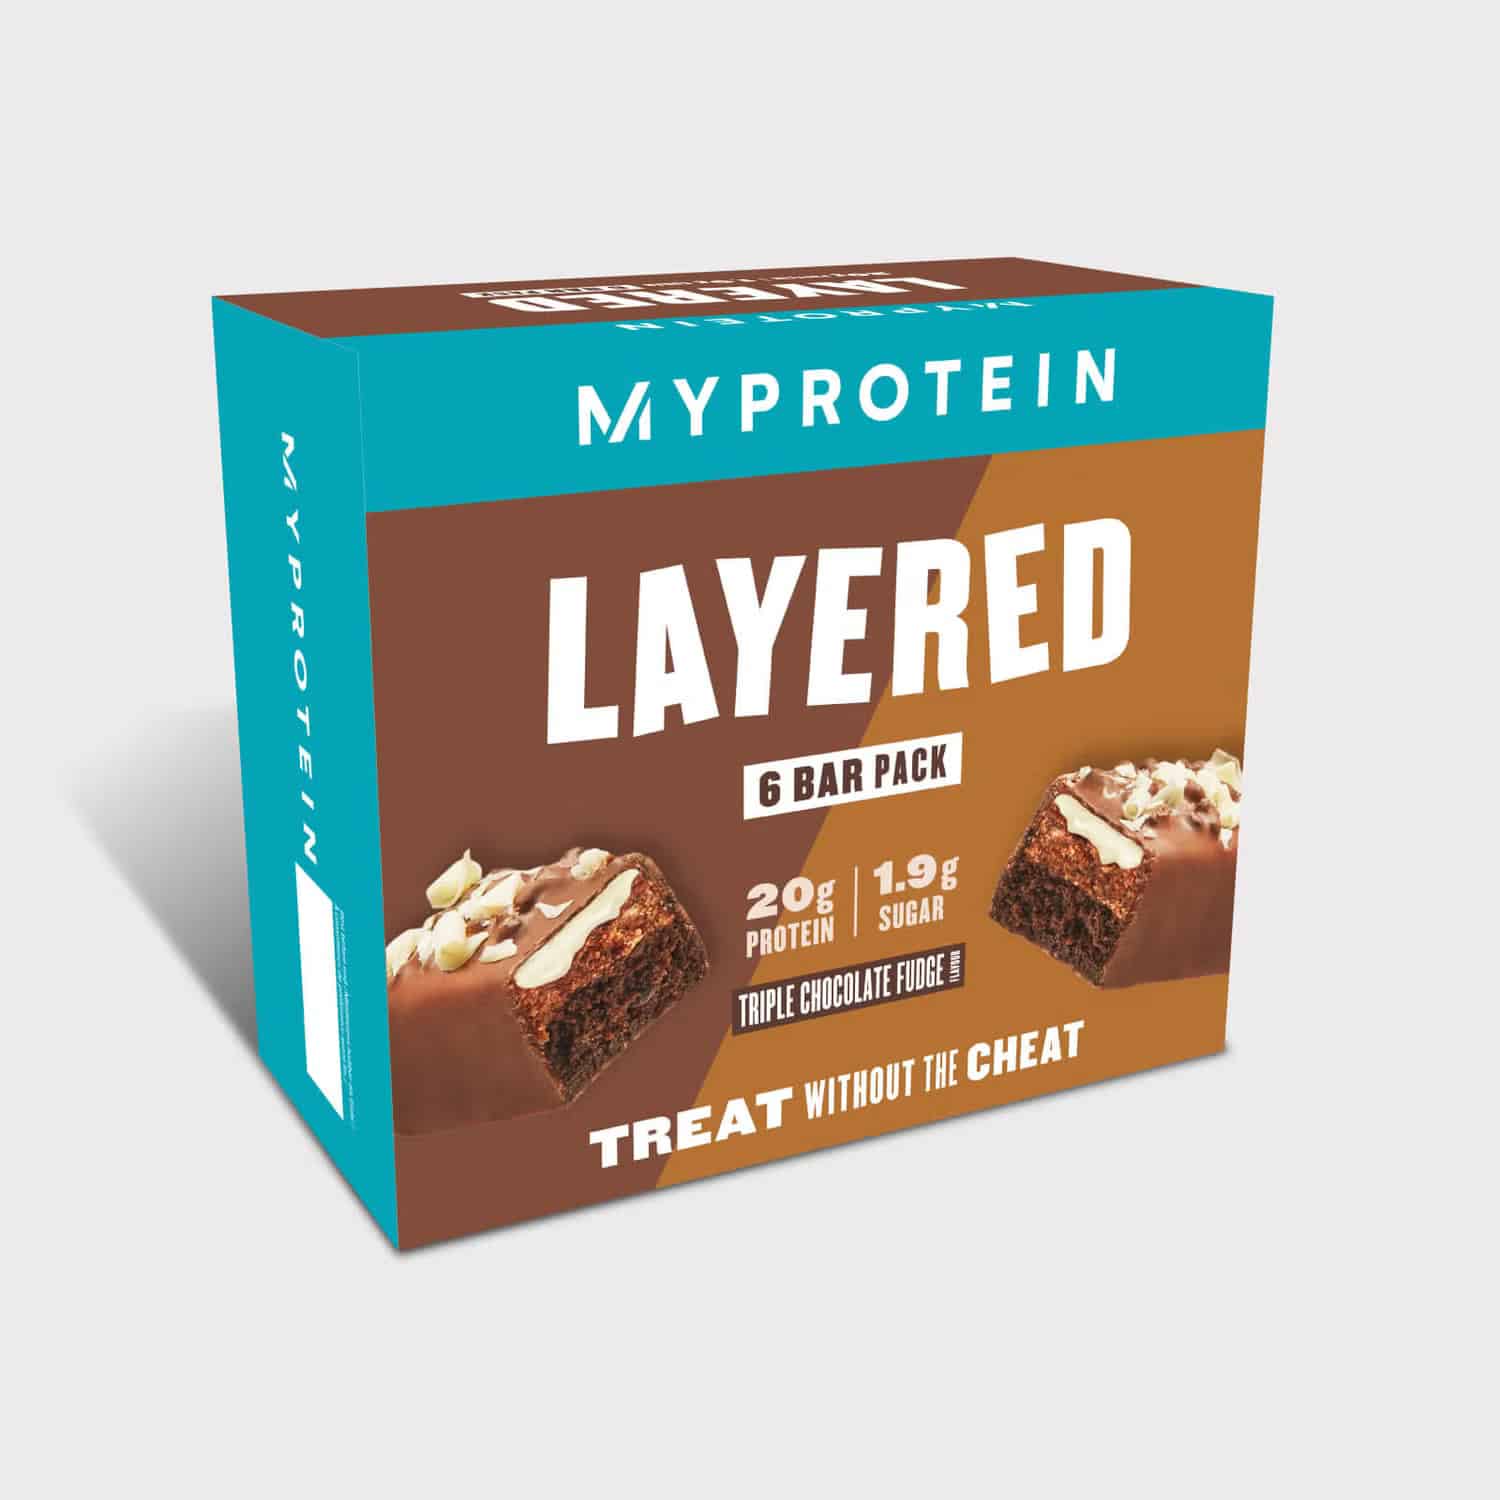 Layered Protein Bar 6 Bar Pack Discounts and Cashback